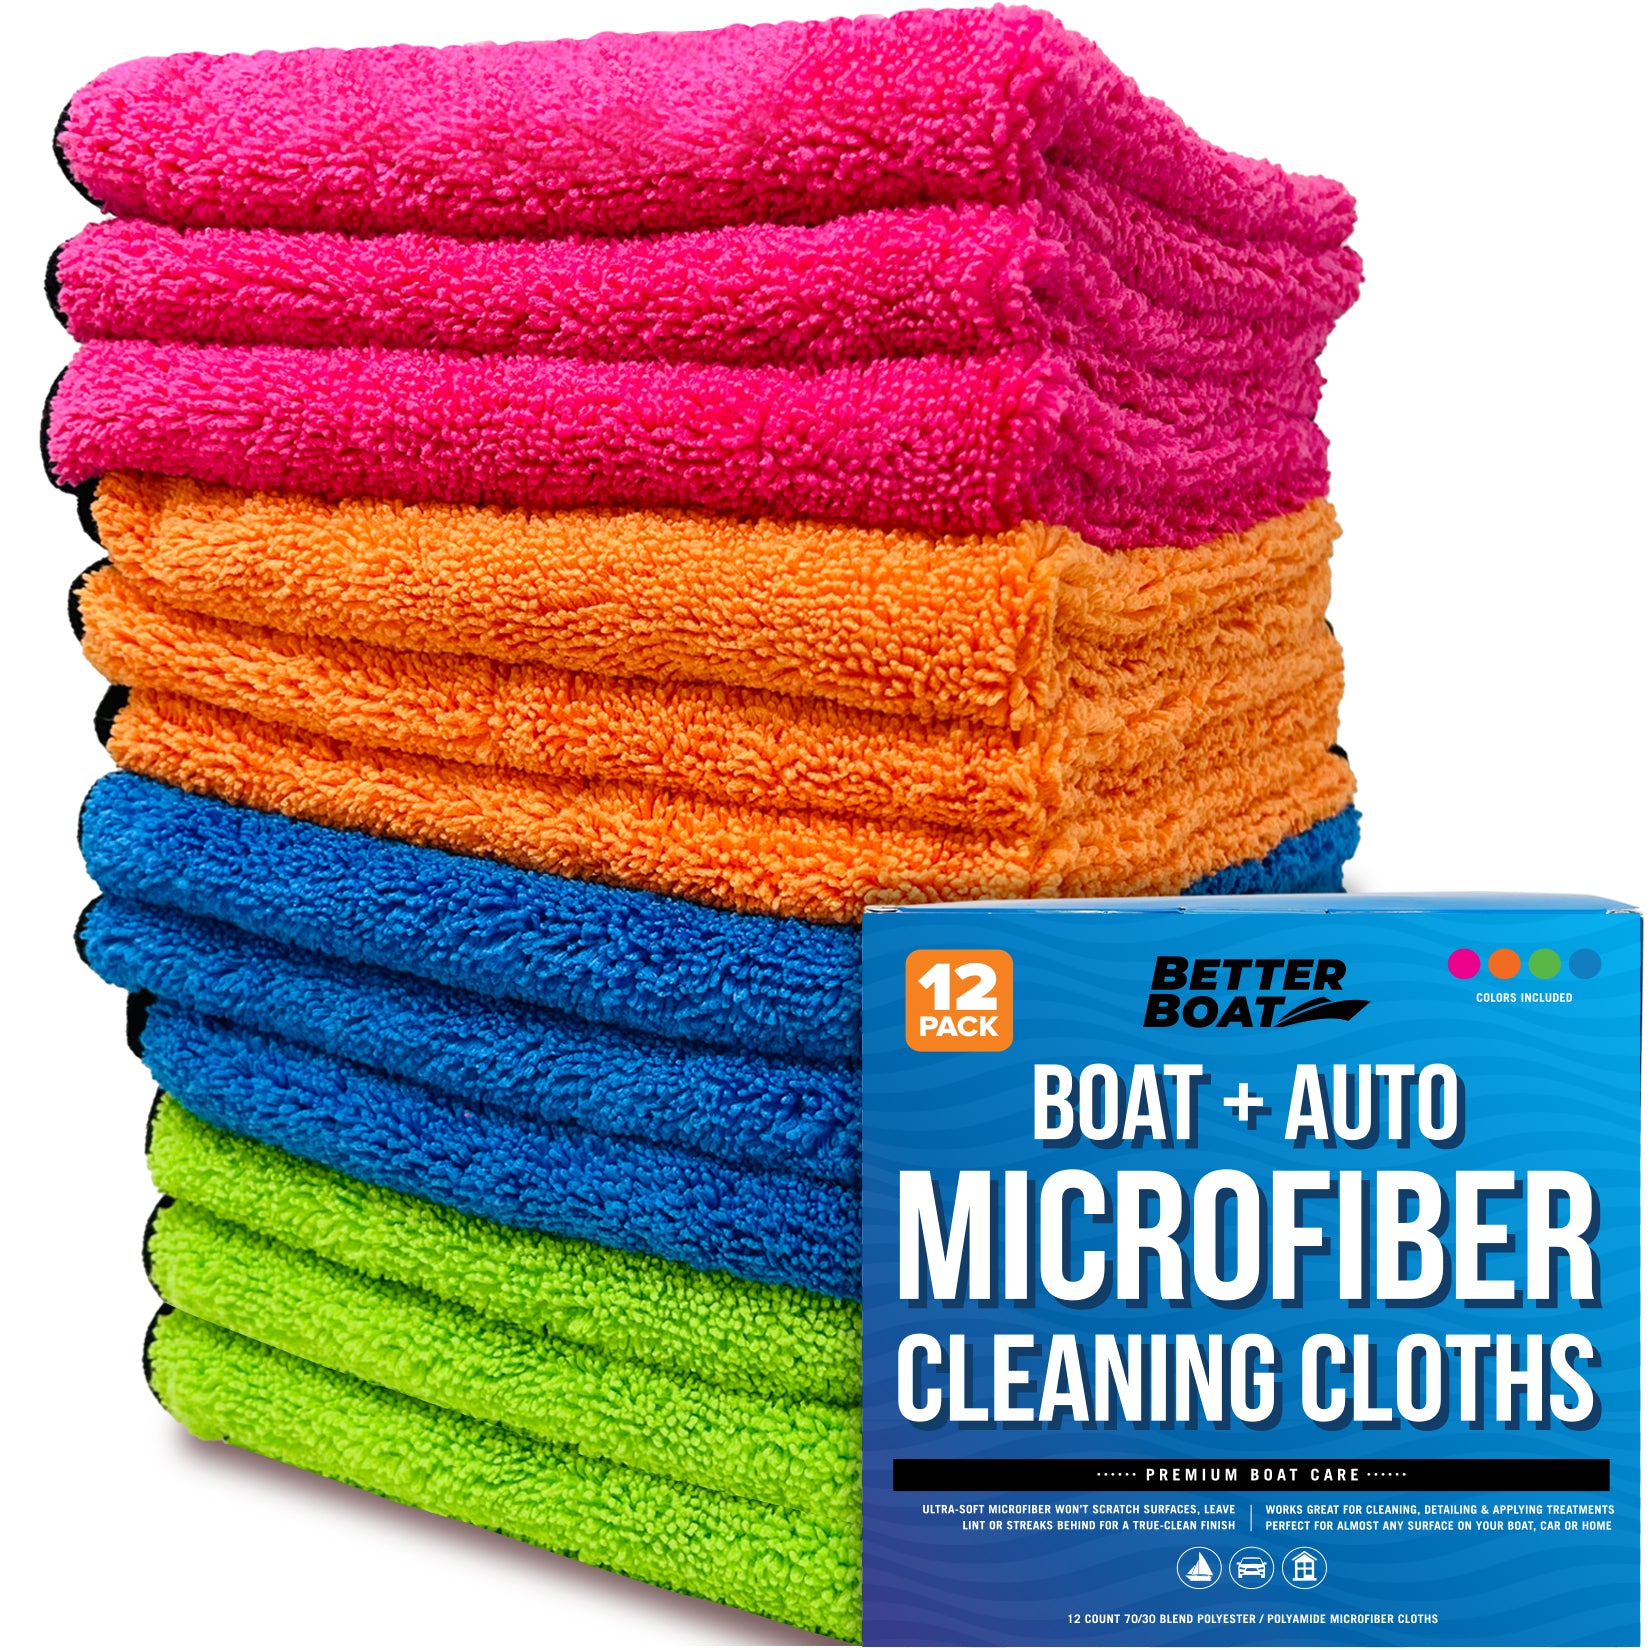 How to use a microfiber cloth to clean your home